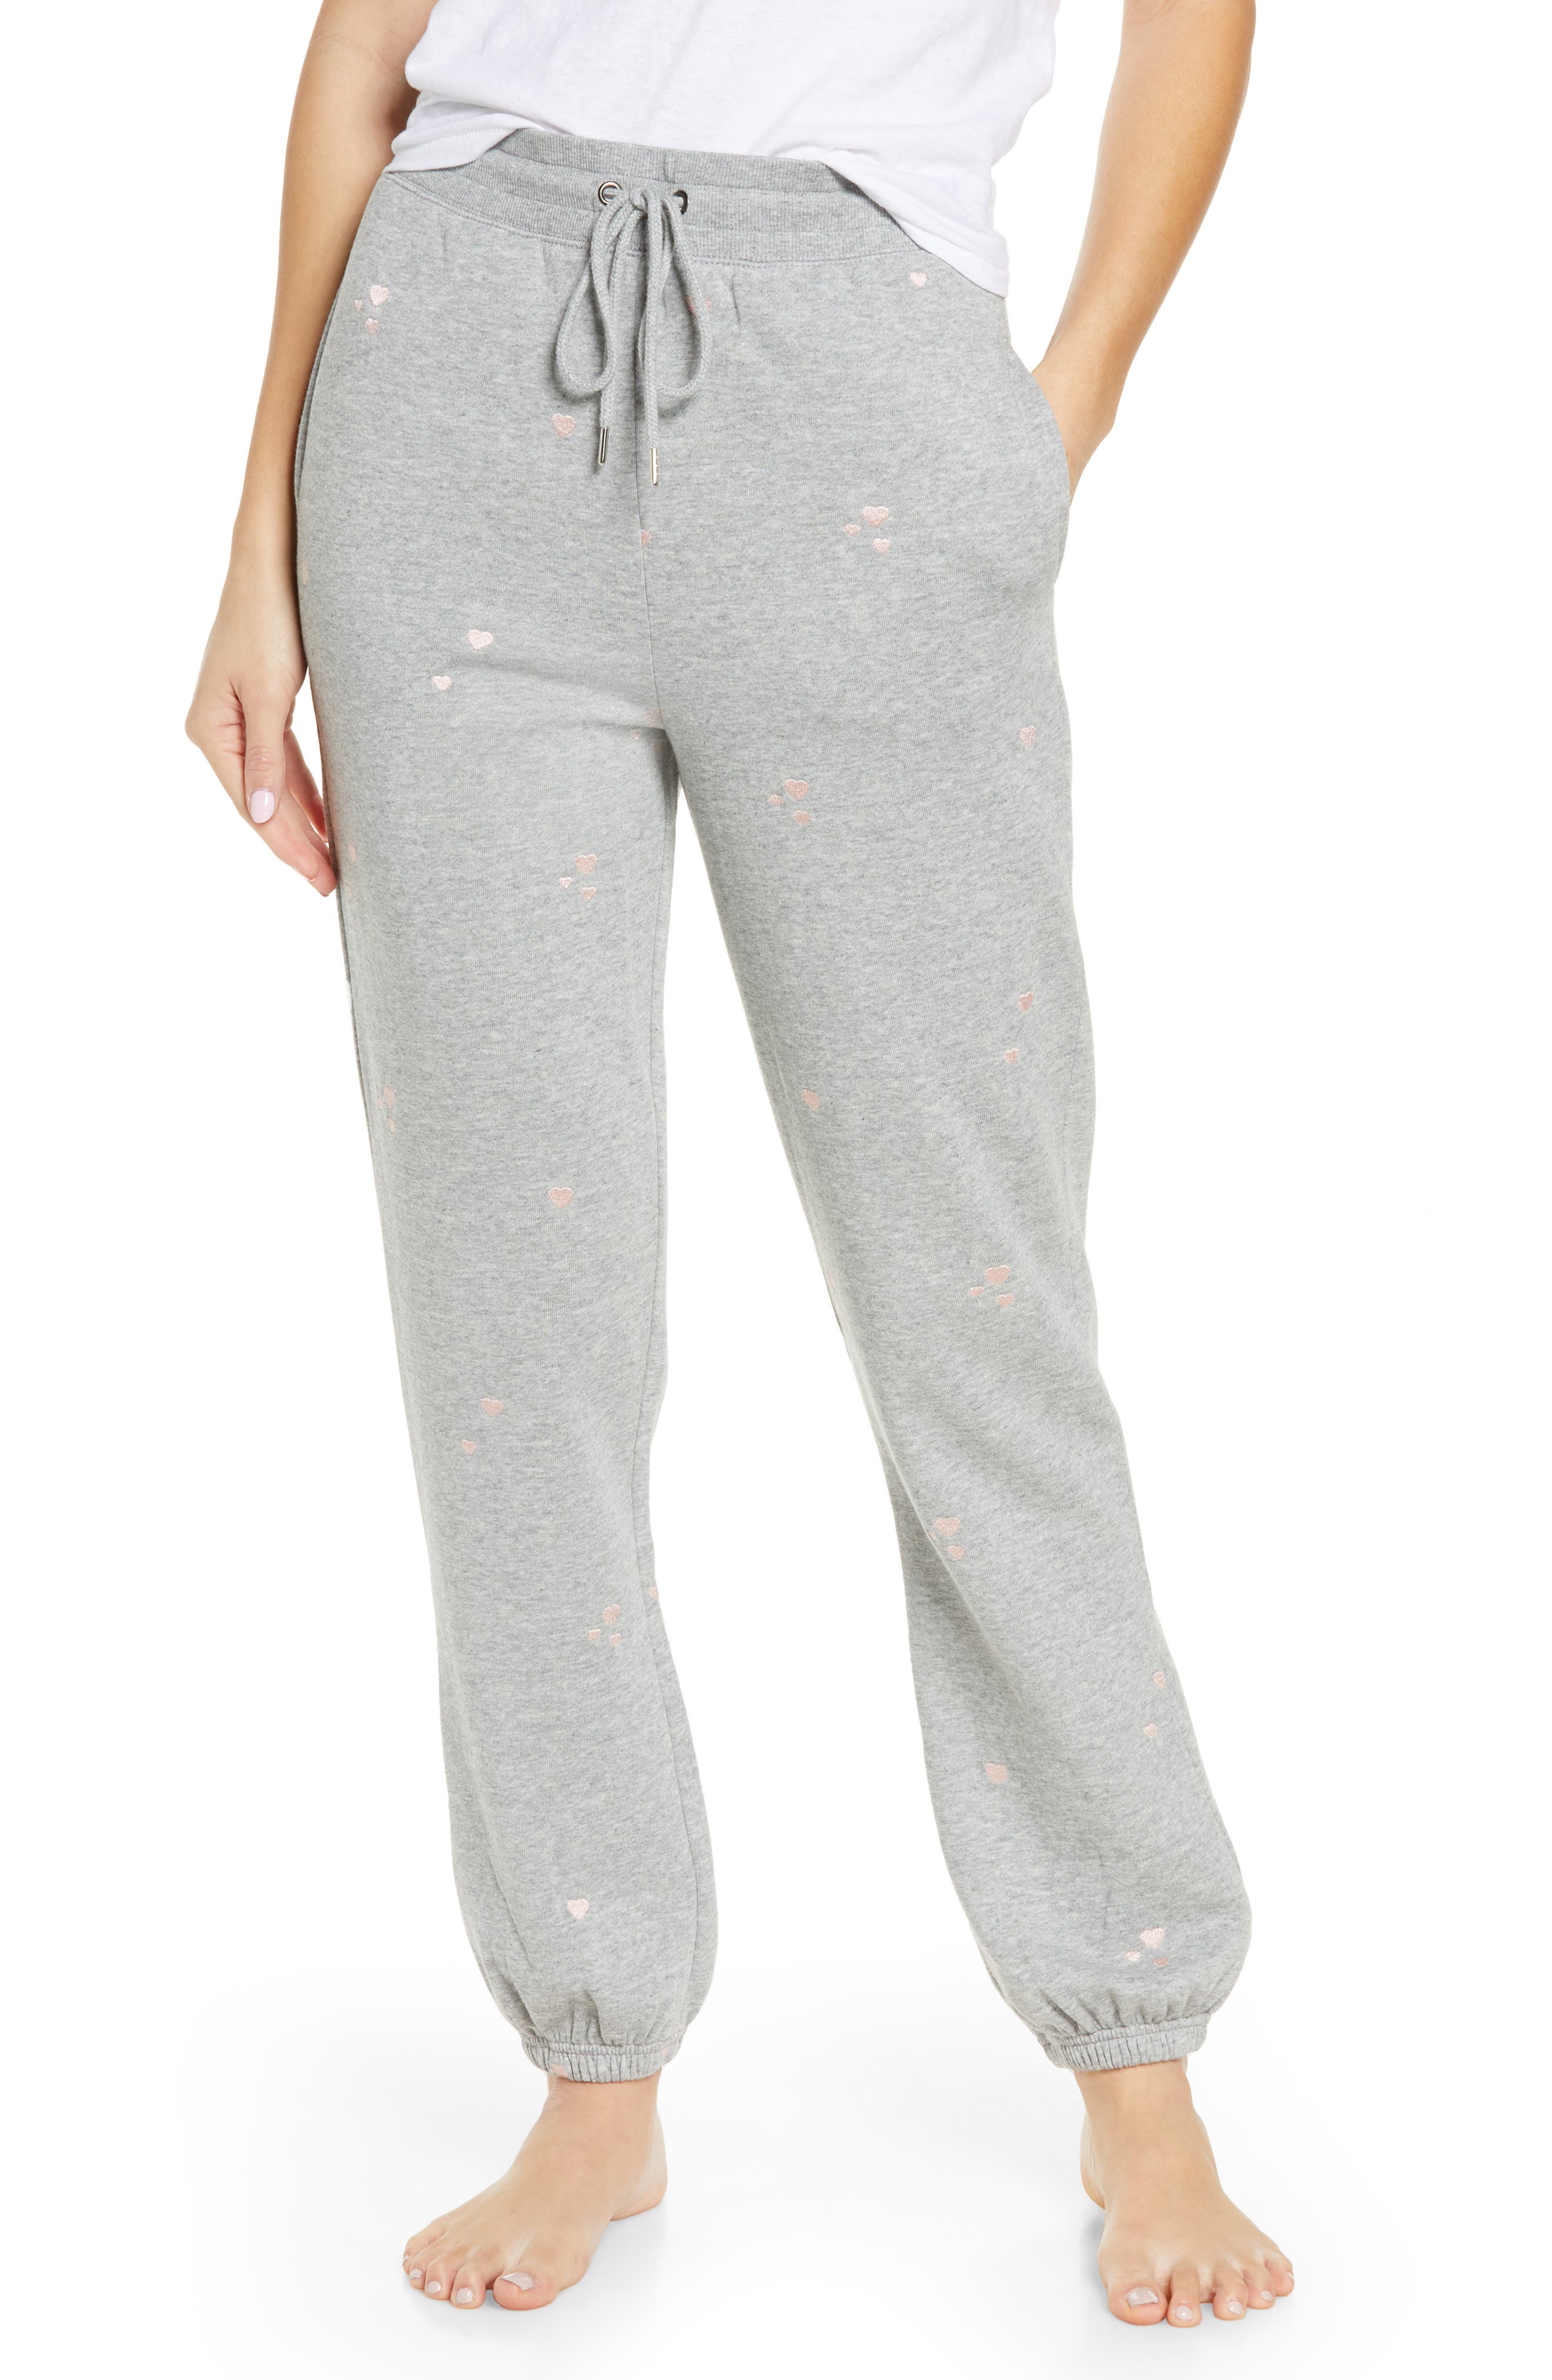 HONEYDEW INTIMATES OVER THE MOON LOUNGE JOGGERS,889945213306